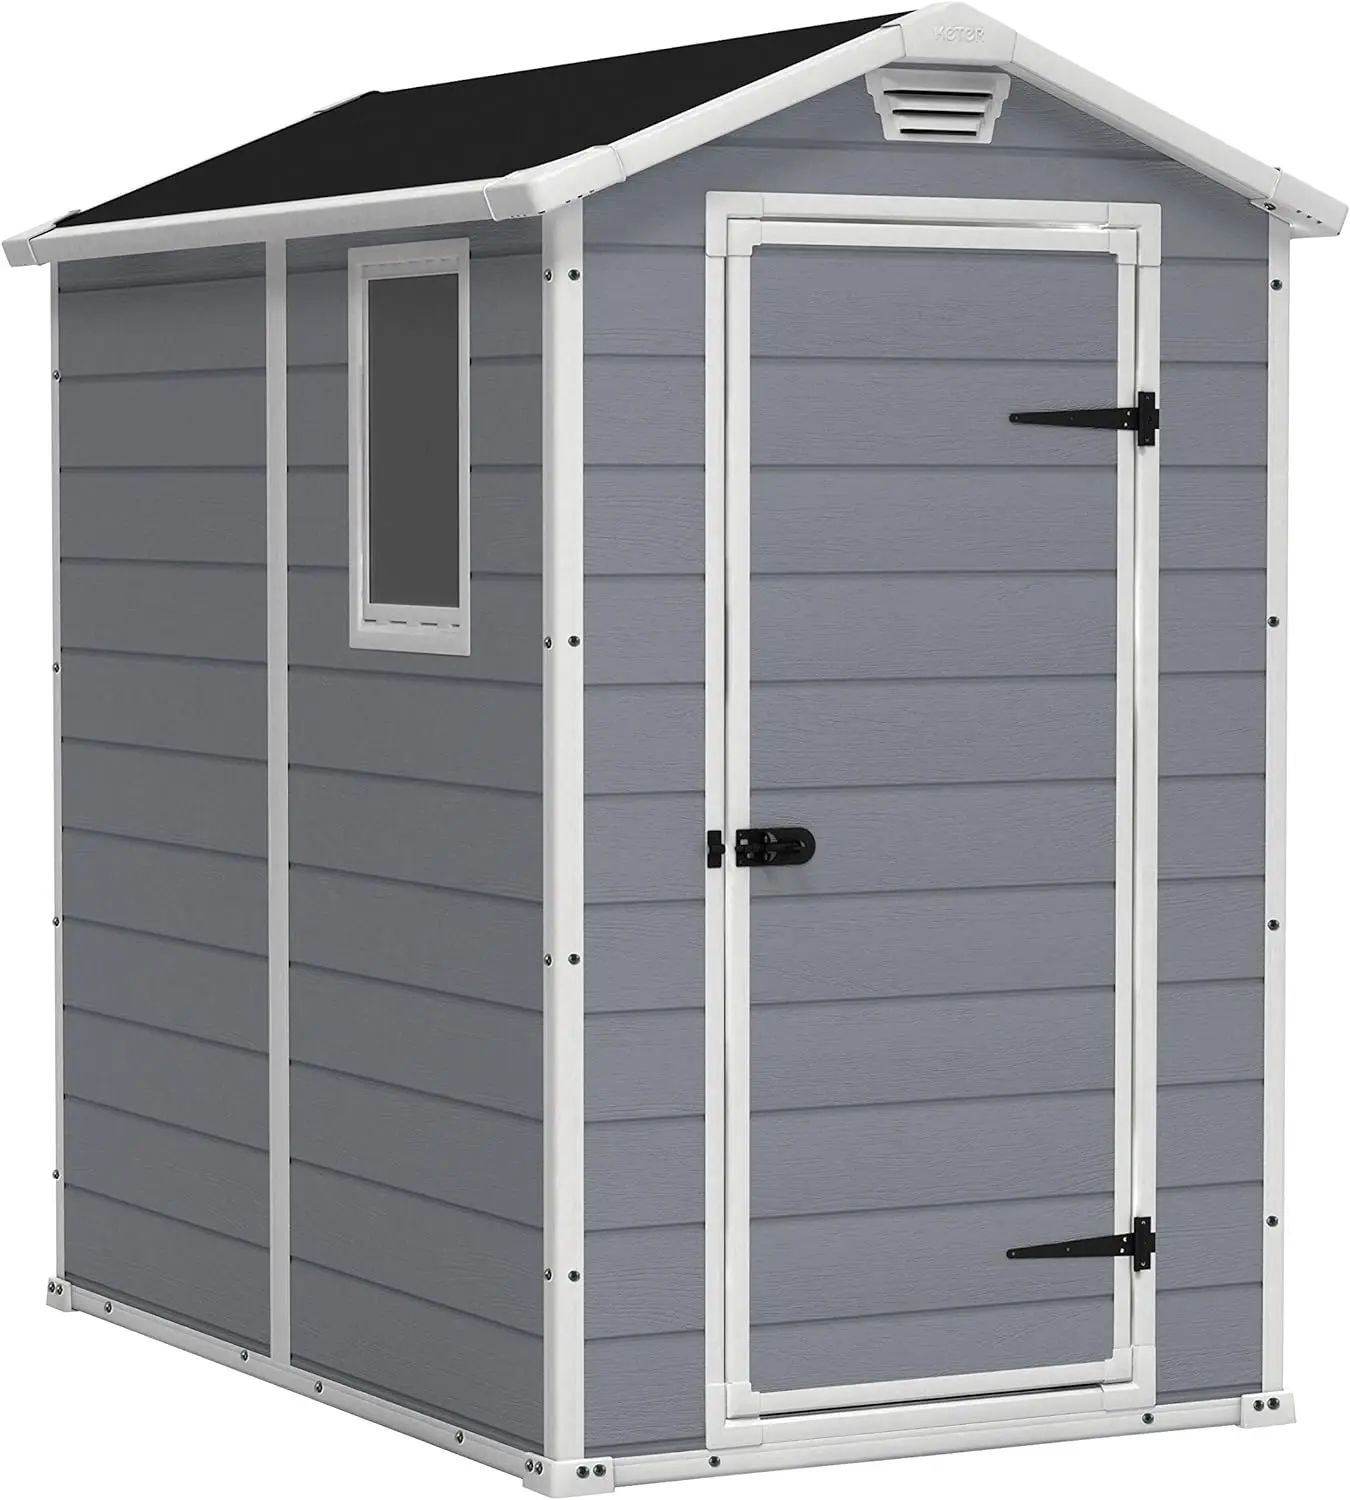 Keter Manor 4x6 Resin Outdoor Storage Shed Kit-Perfect to Store Patio Furniture, Garden Tools Bike Accessories,Grey & White